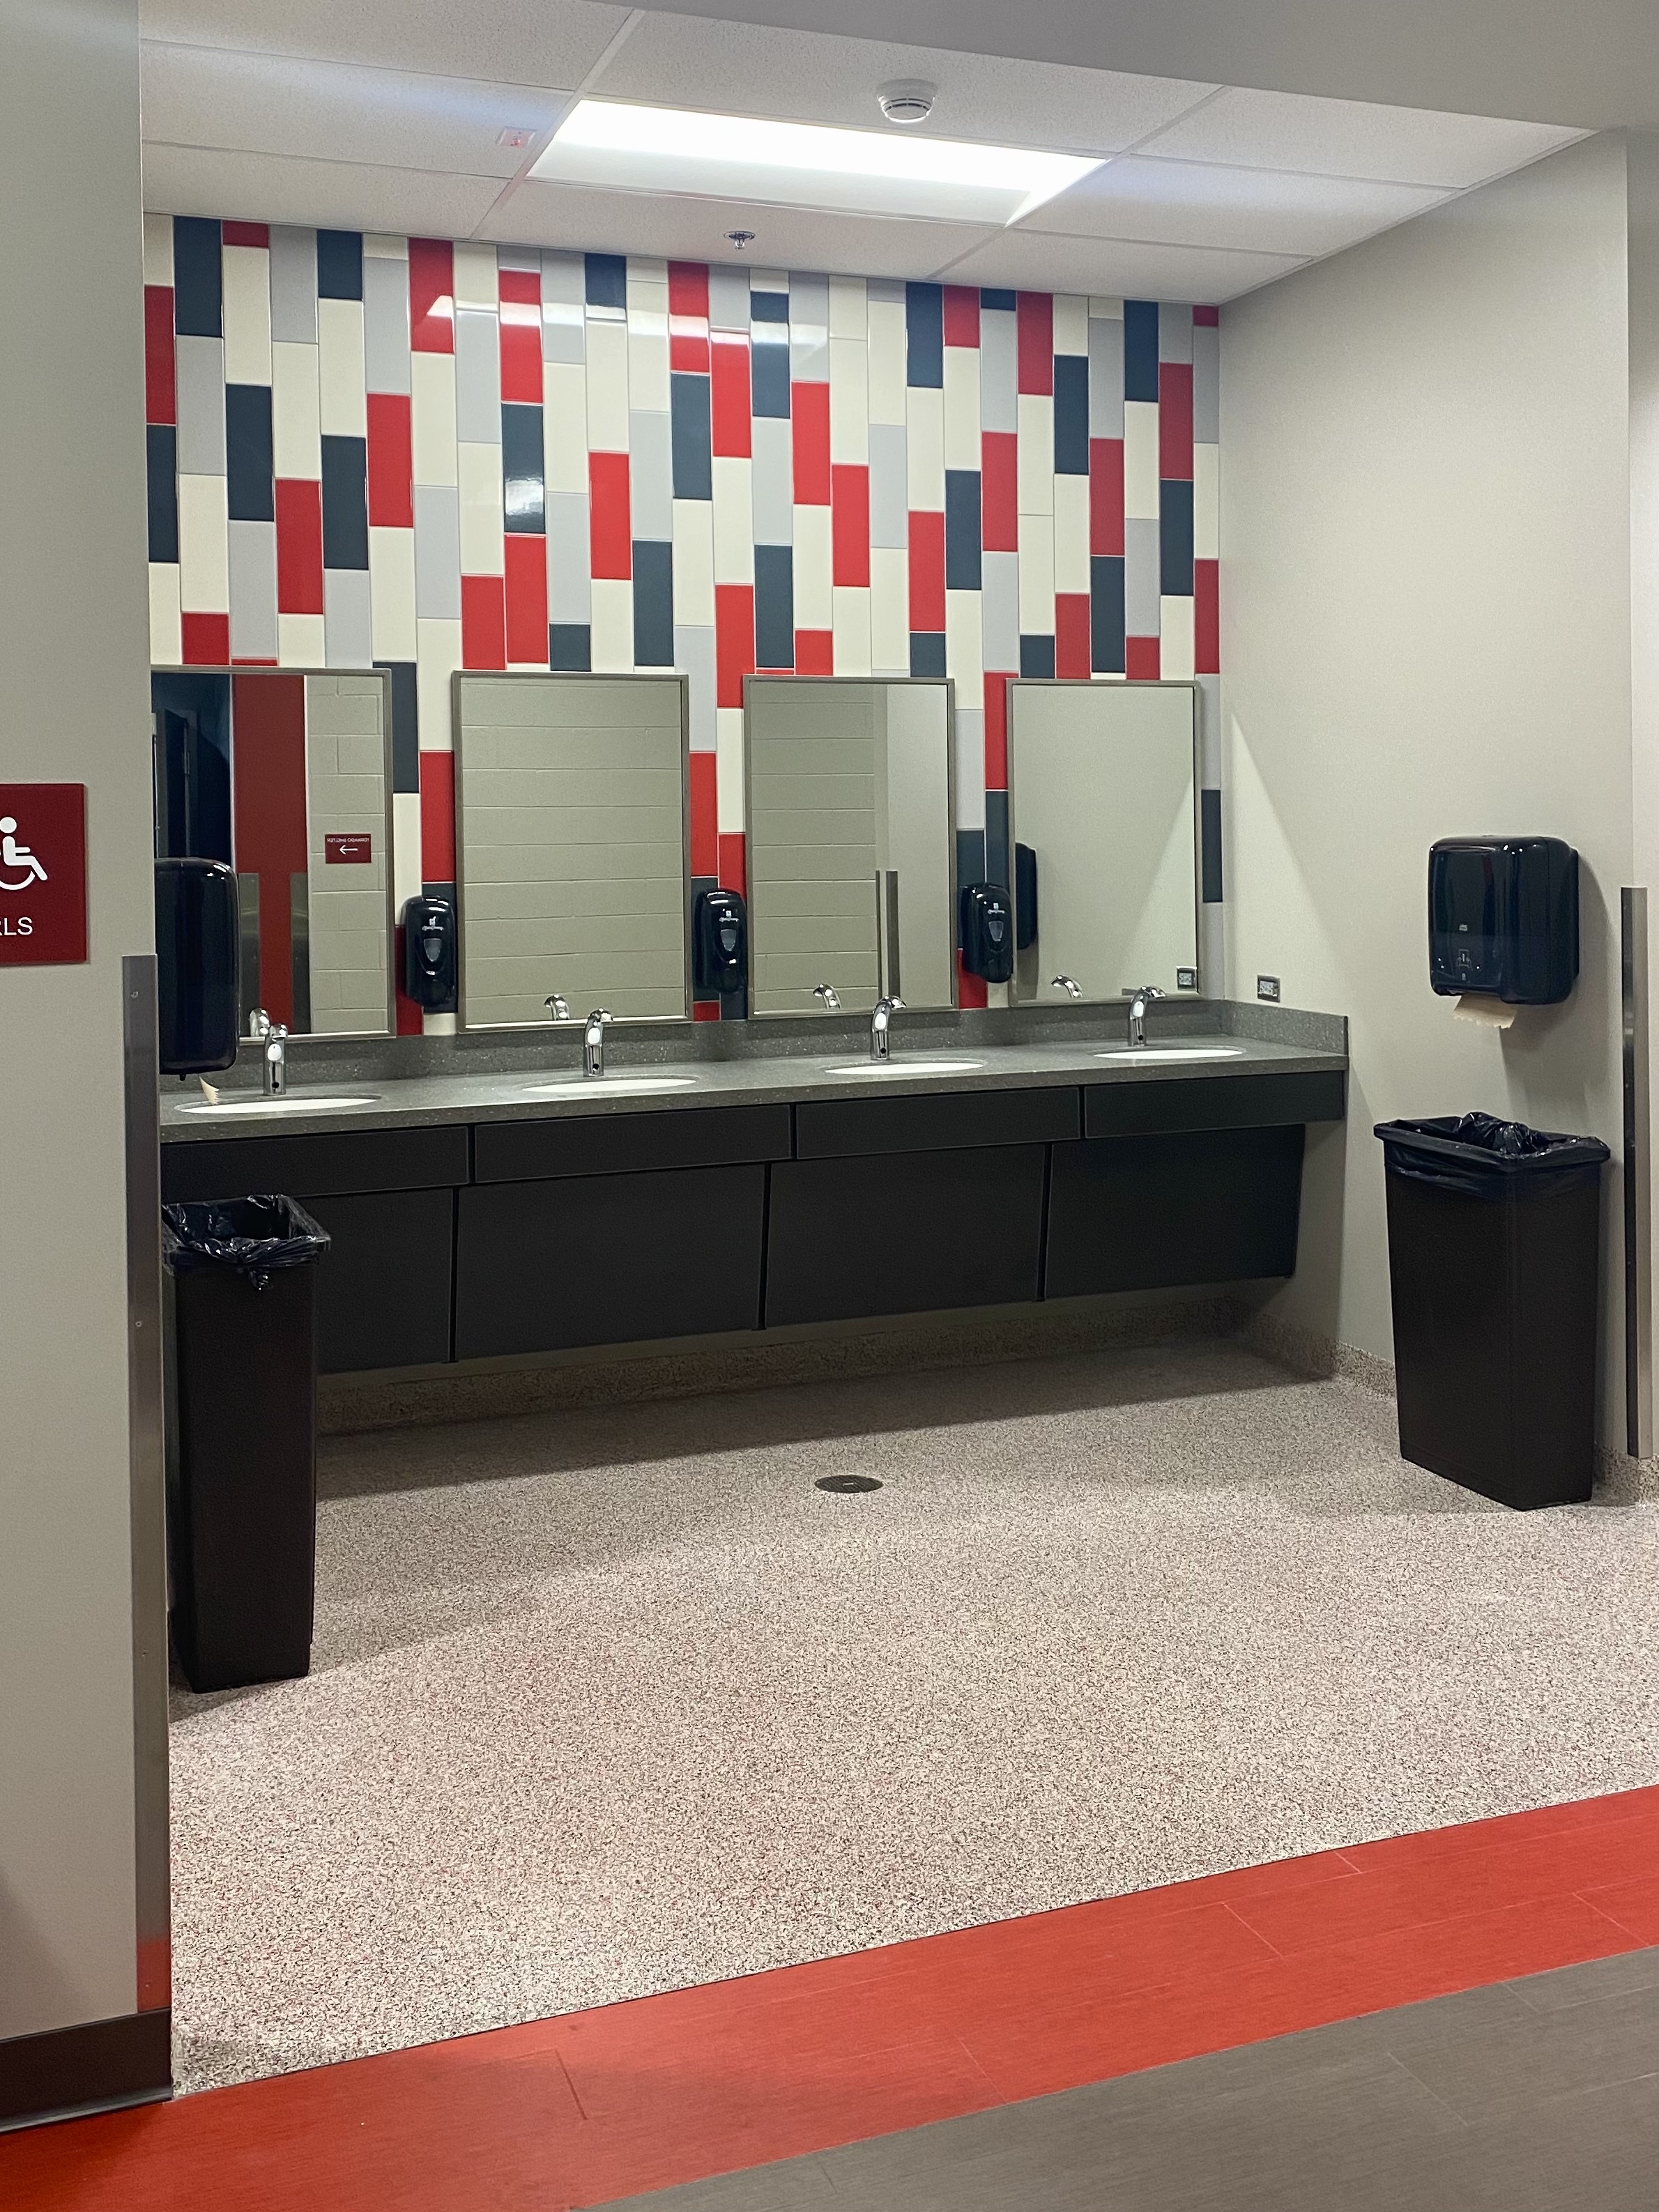 New bathrooms in elementary building